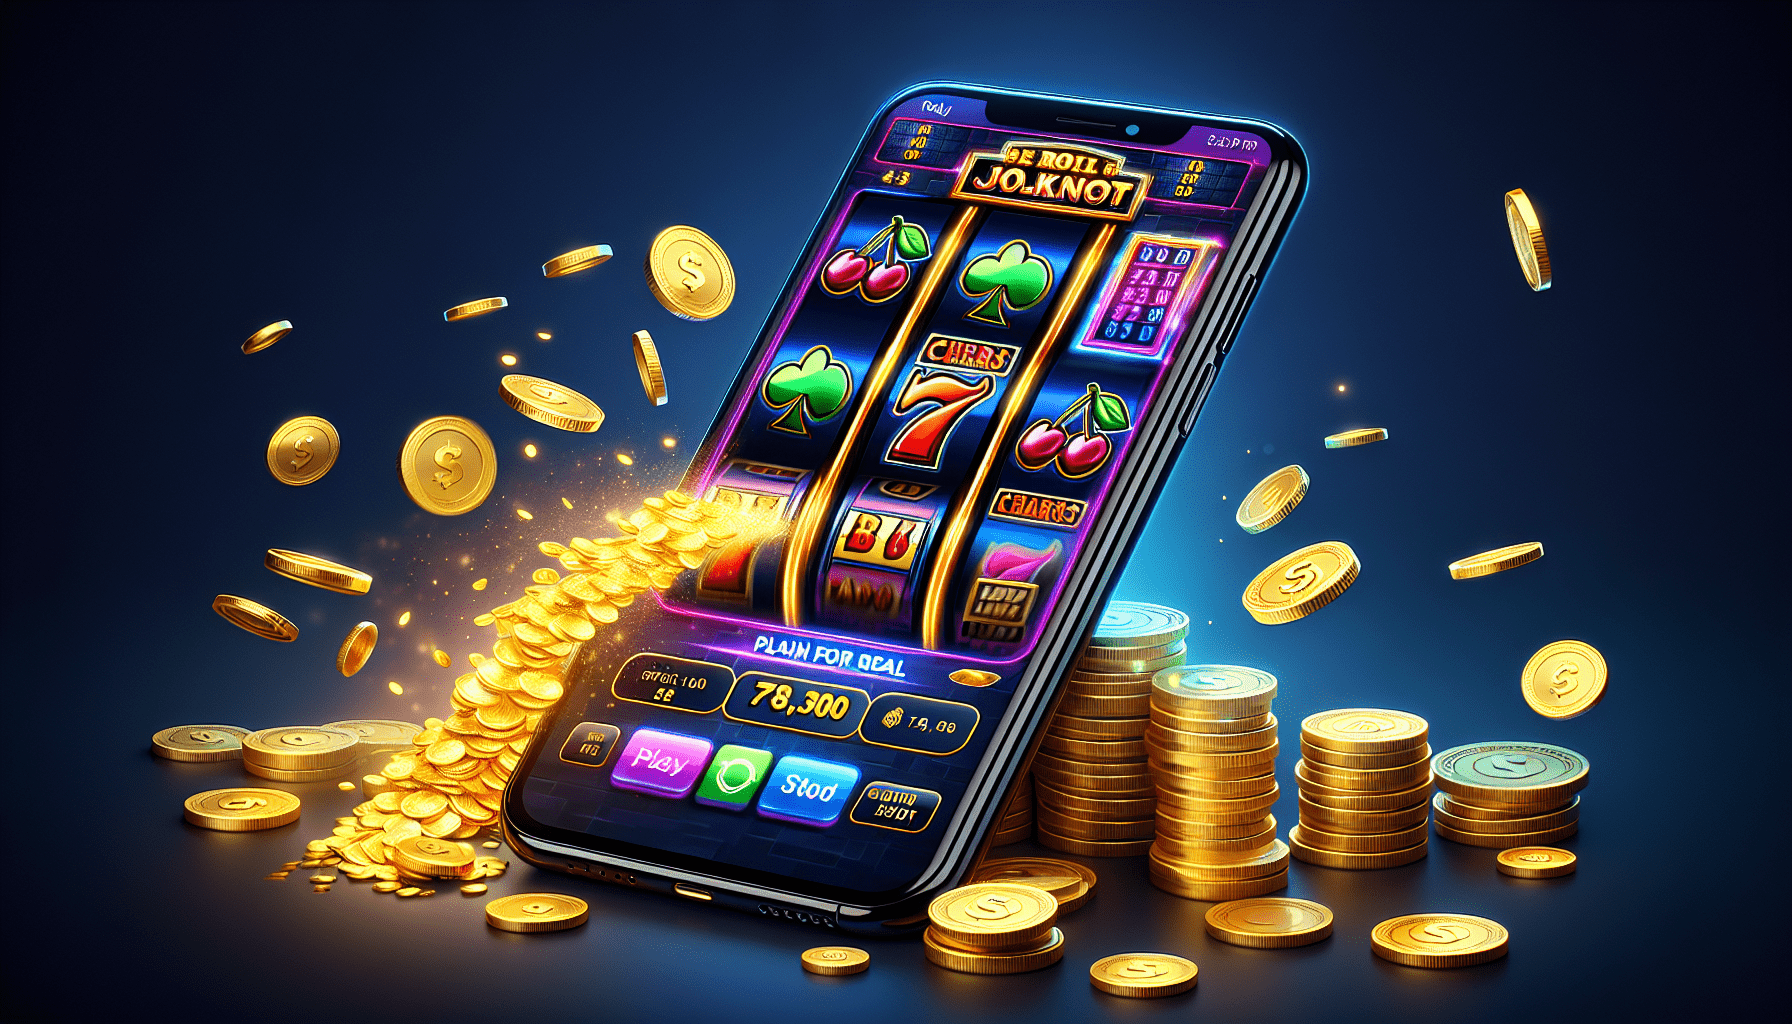 What Slots Can I Play On My Phone For Real Money?